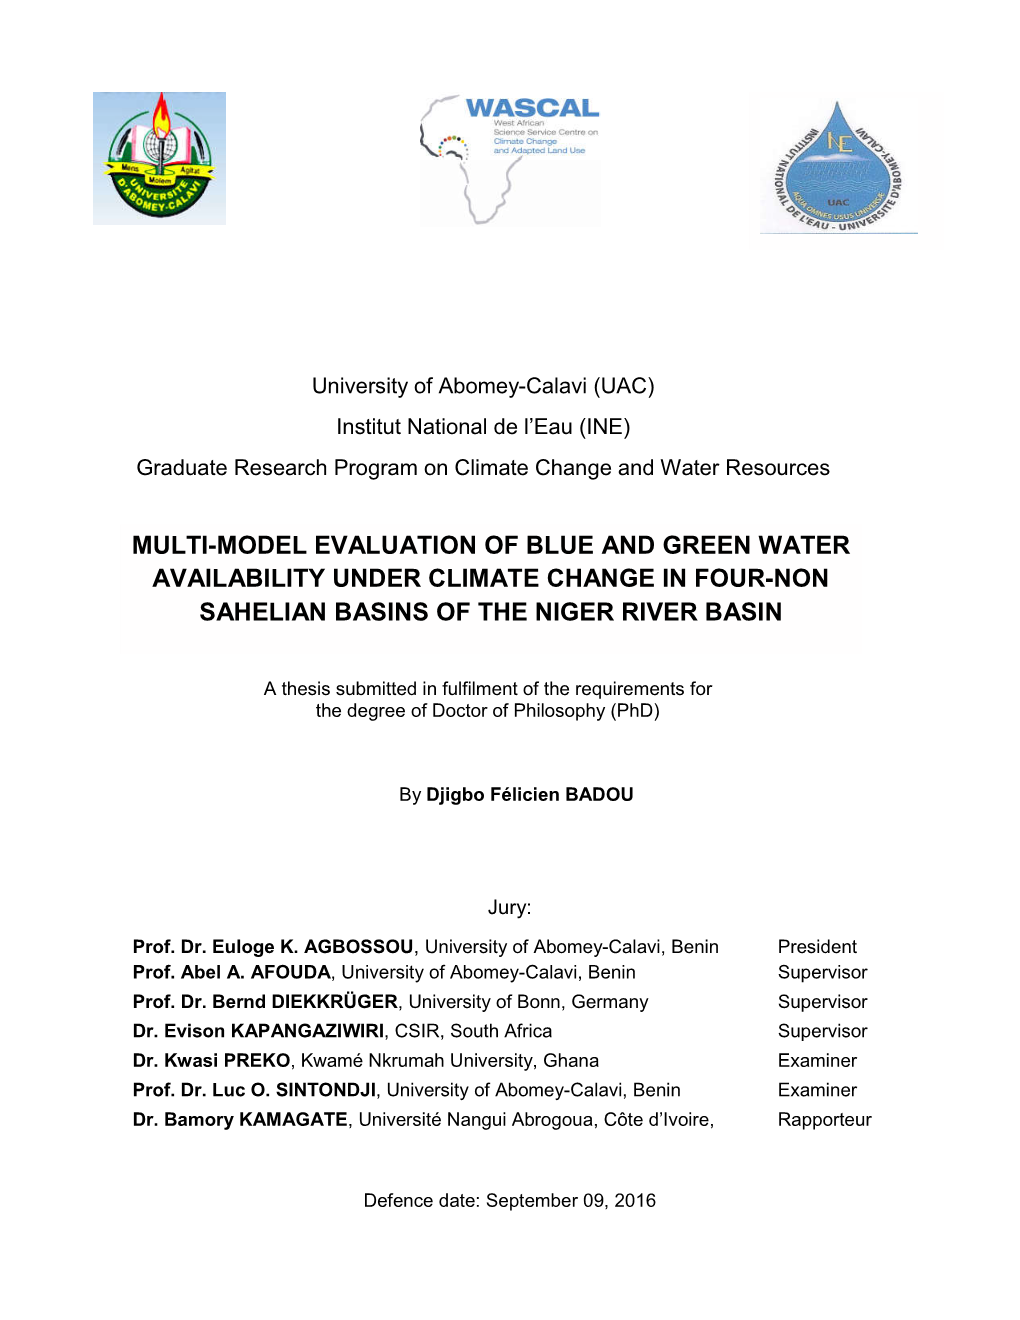 Multi-Model Evaluation of Blue and Green Water Availability Under